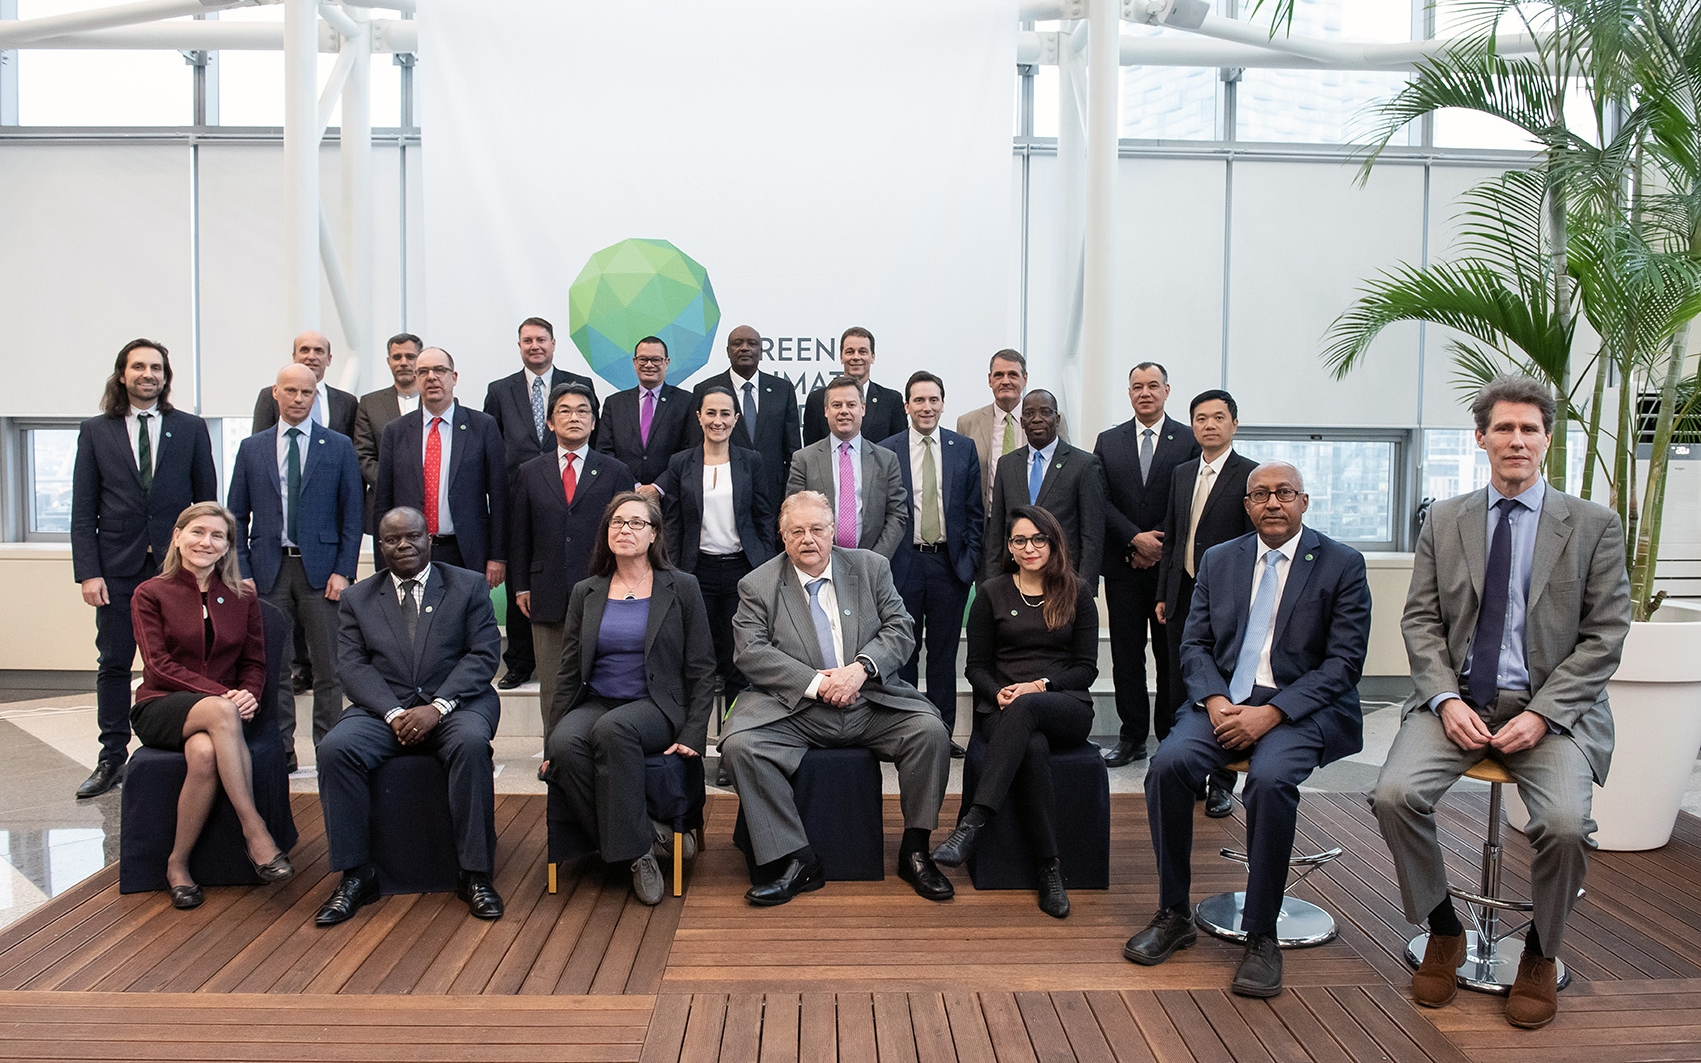 Group photo of the Board at the headquarters in Songdo, South Korea, during its 22nd meeting in February 2019